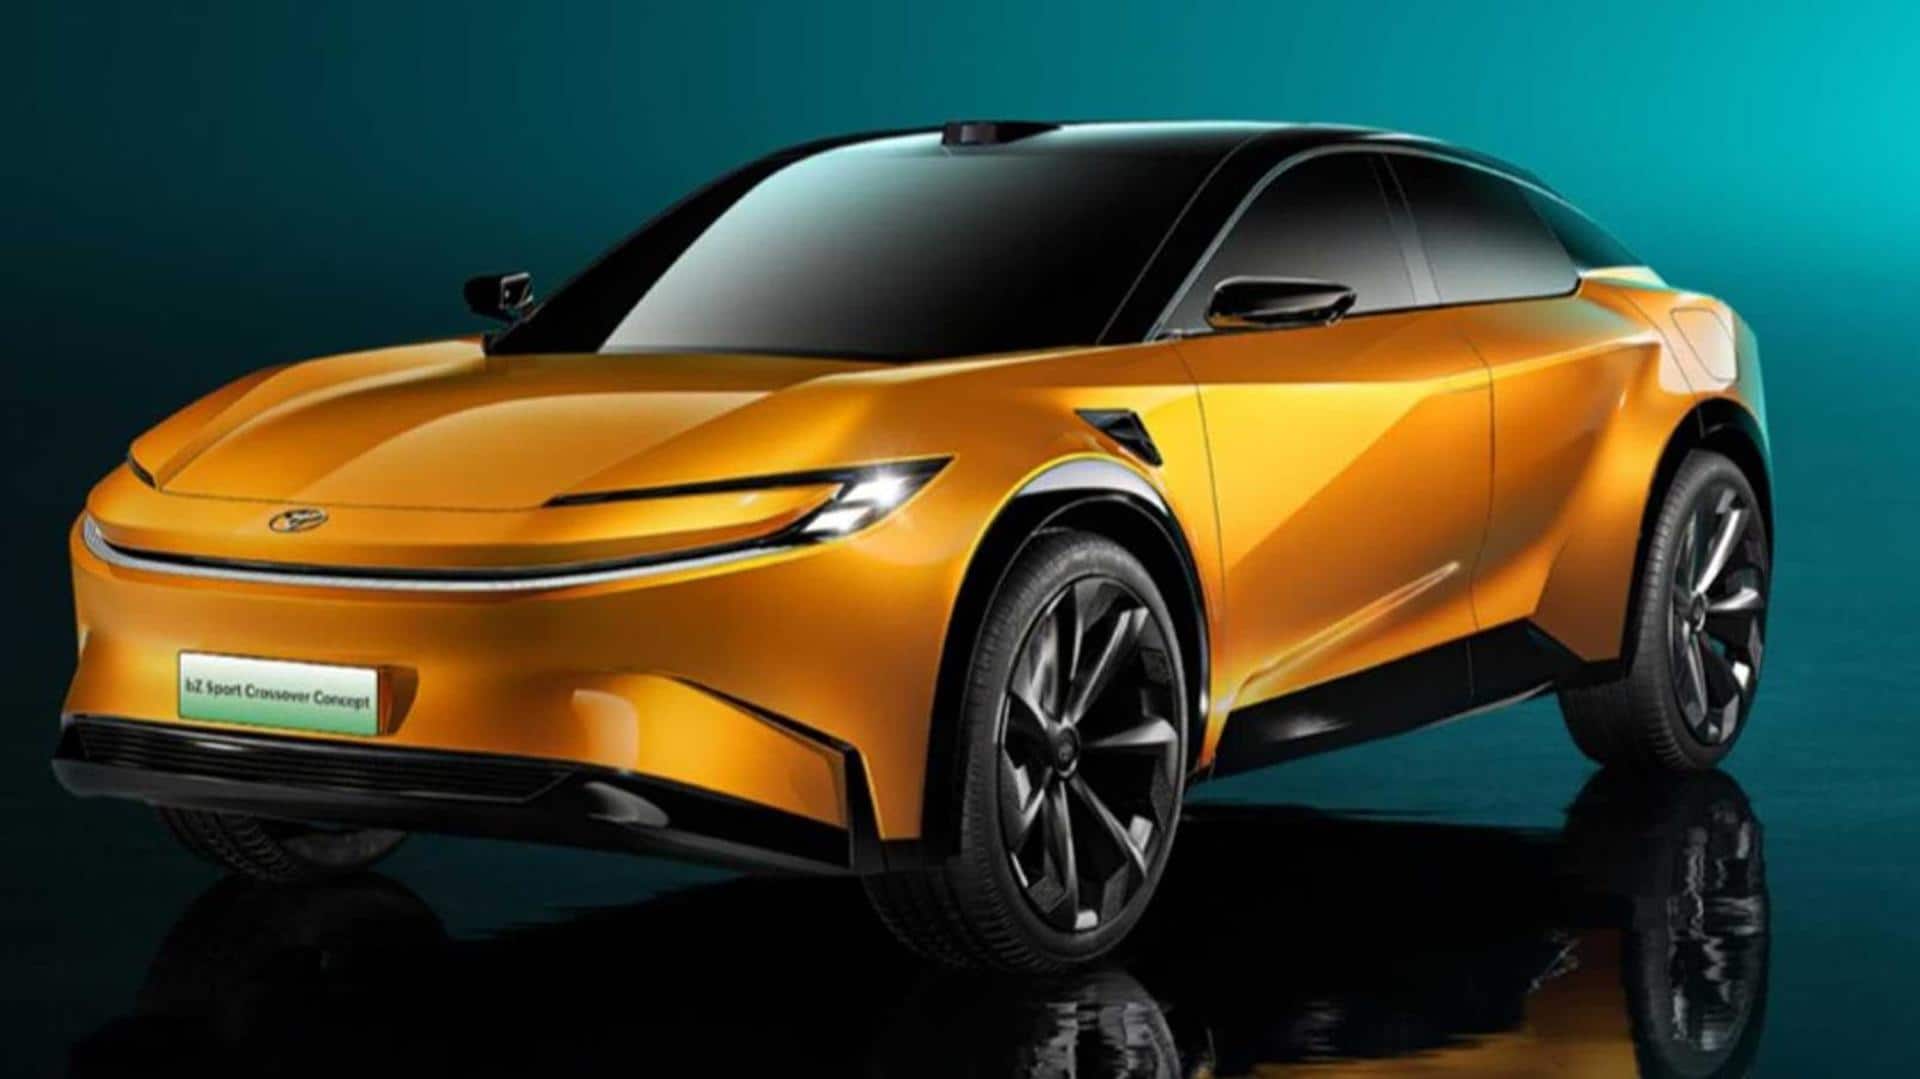 Toyota bZ Sport Crossover, bZ FlexSpace concepts debut: Check features